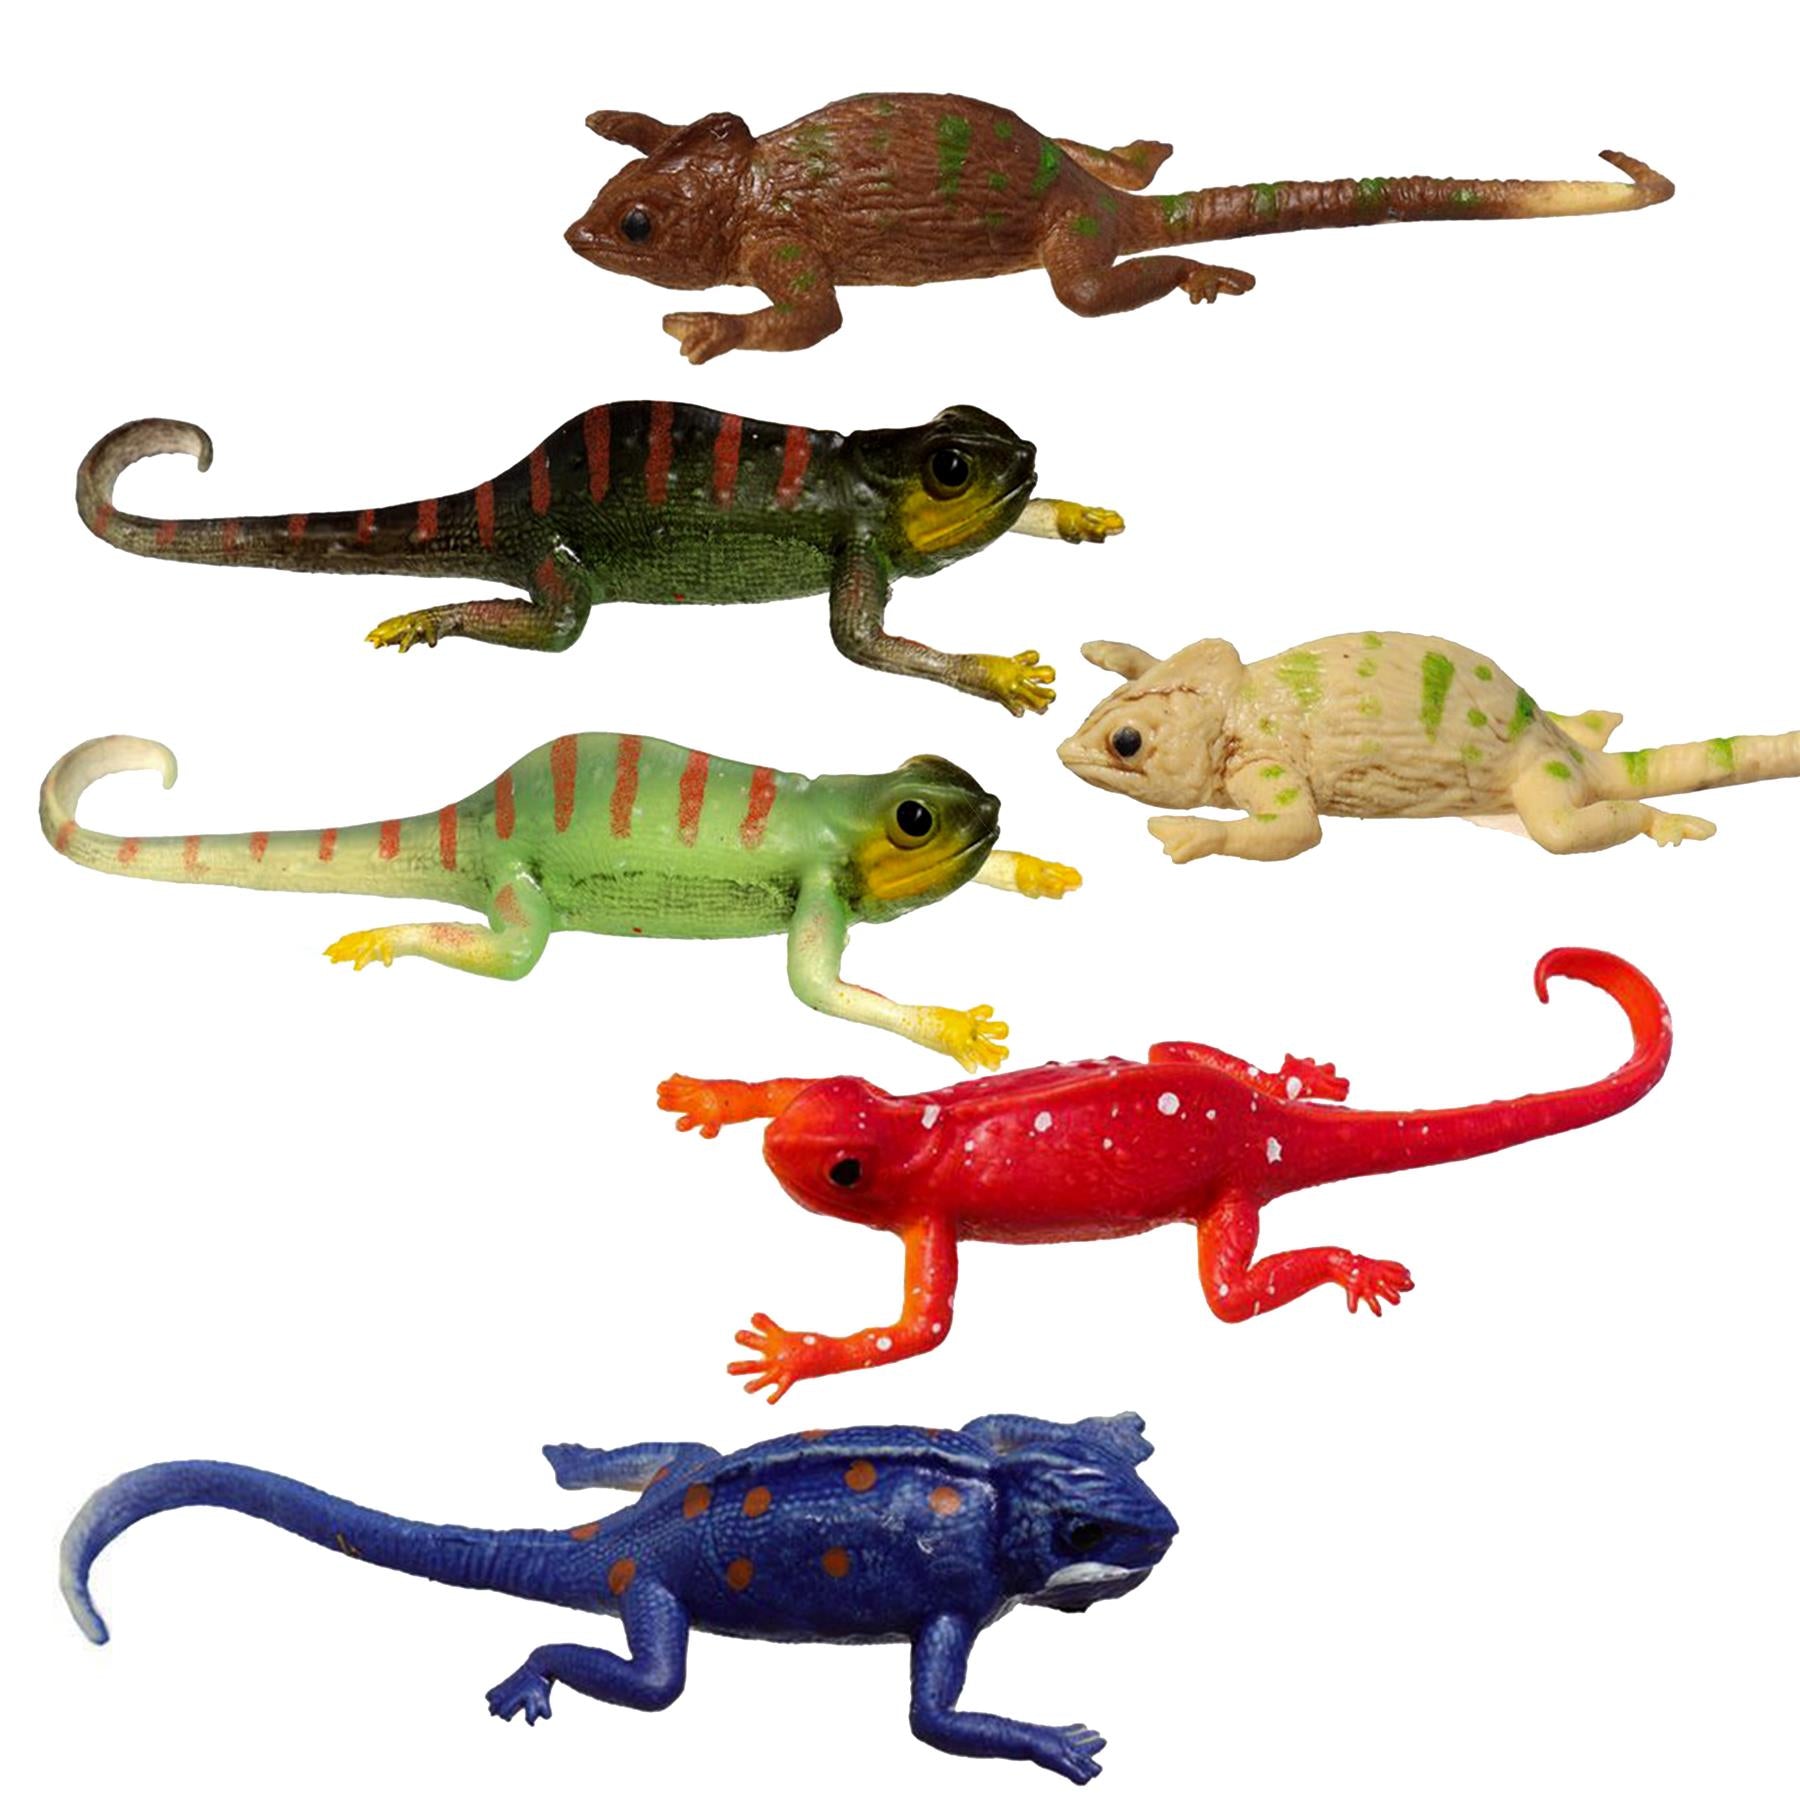 The Magic Toy Shop Stocking Filler Colour Changing Chameleon Lizard Pocket Money Toy